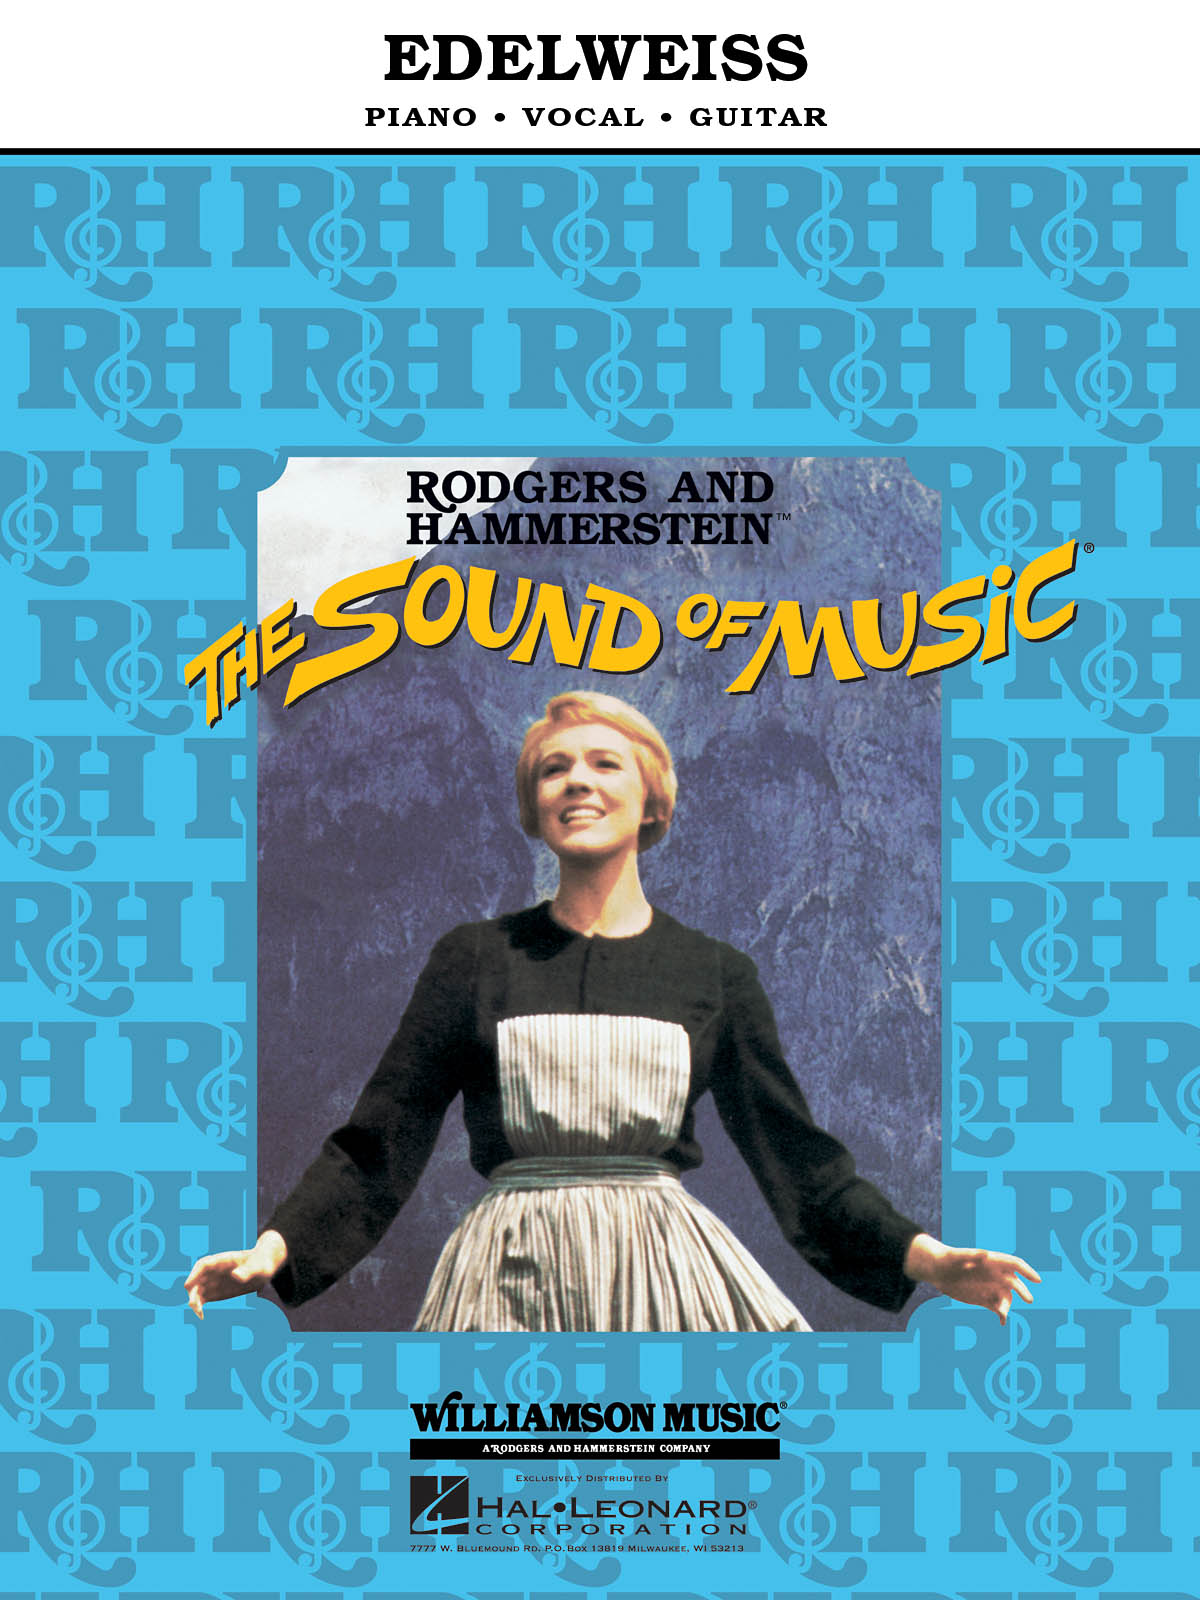 Richard Rogers: Edelweiss (The Sound Of Music)